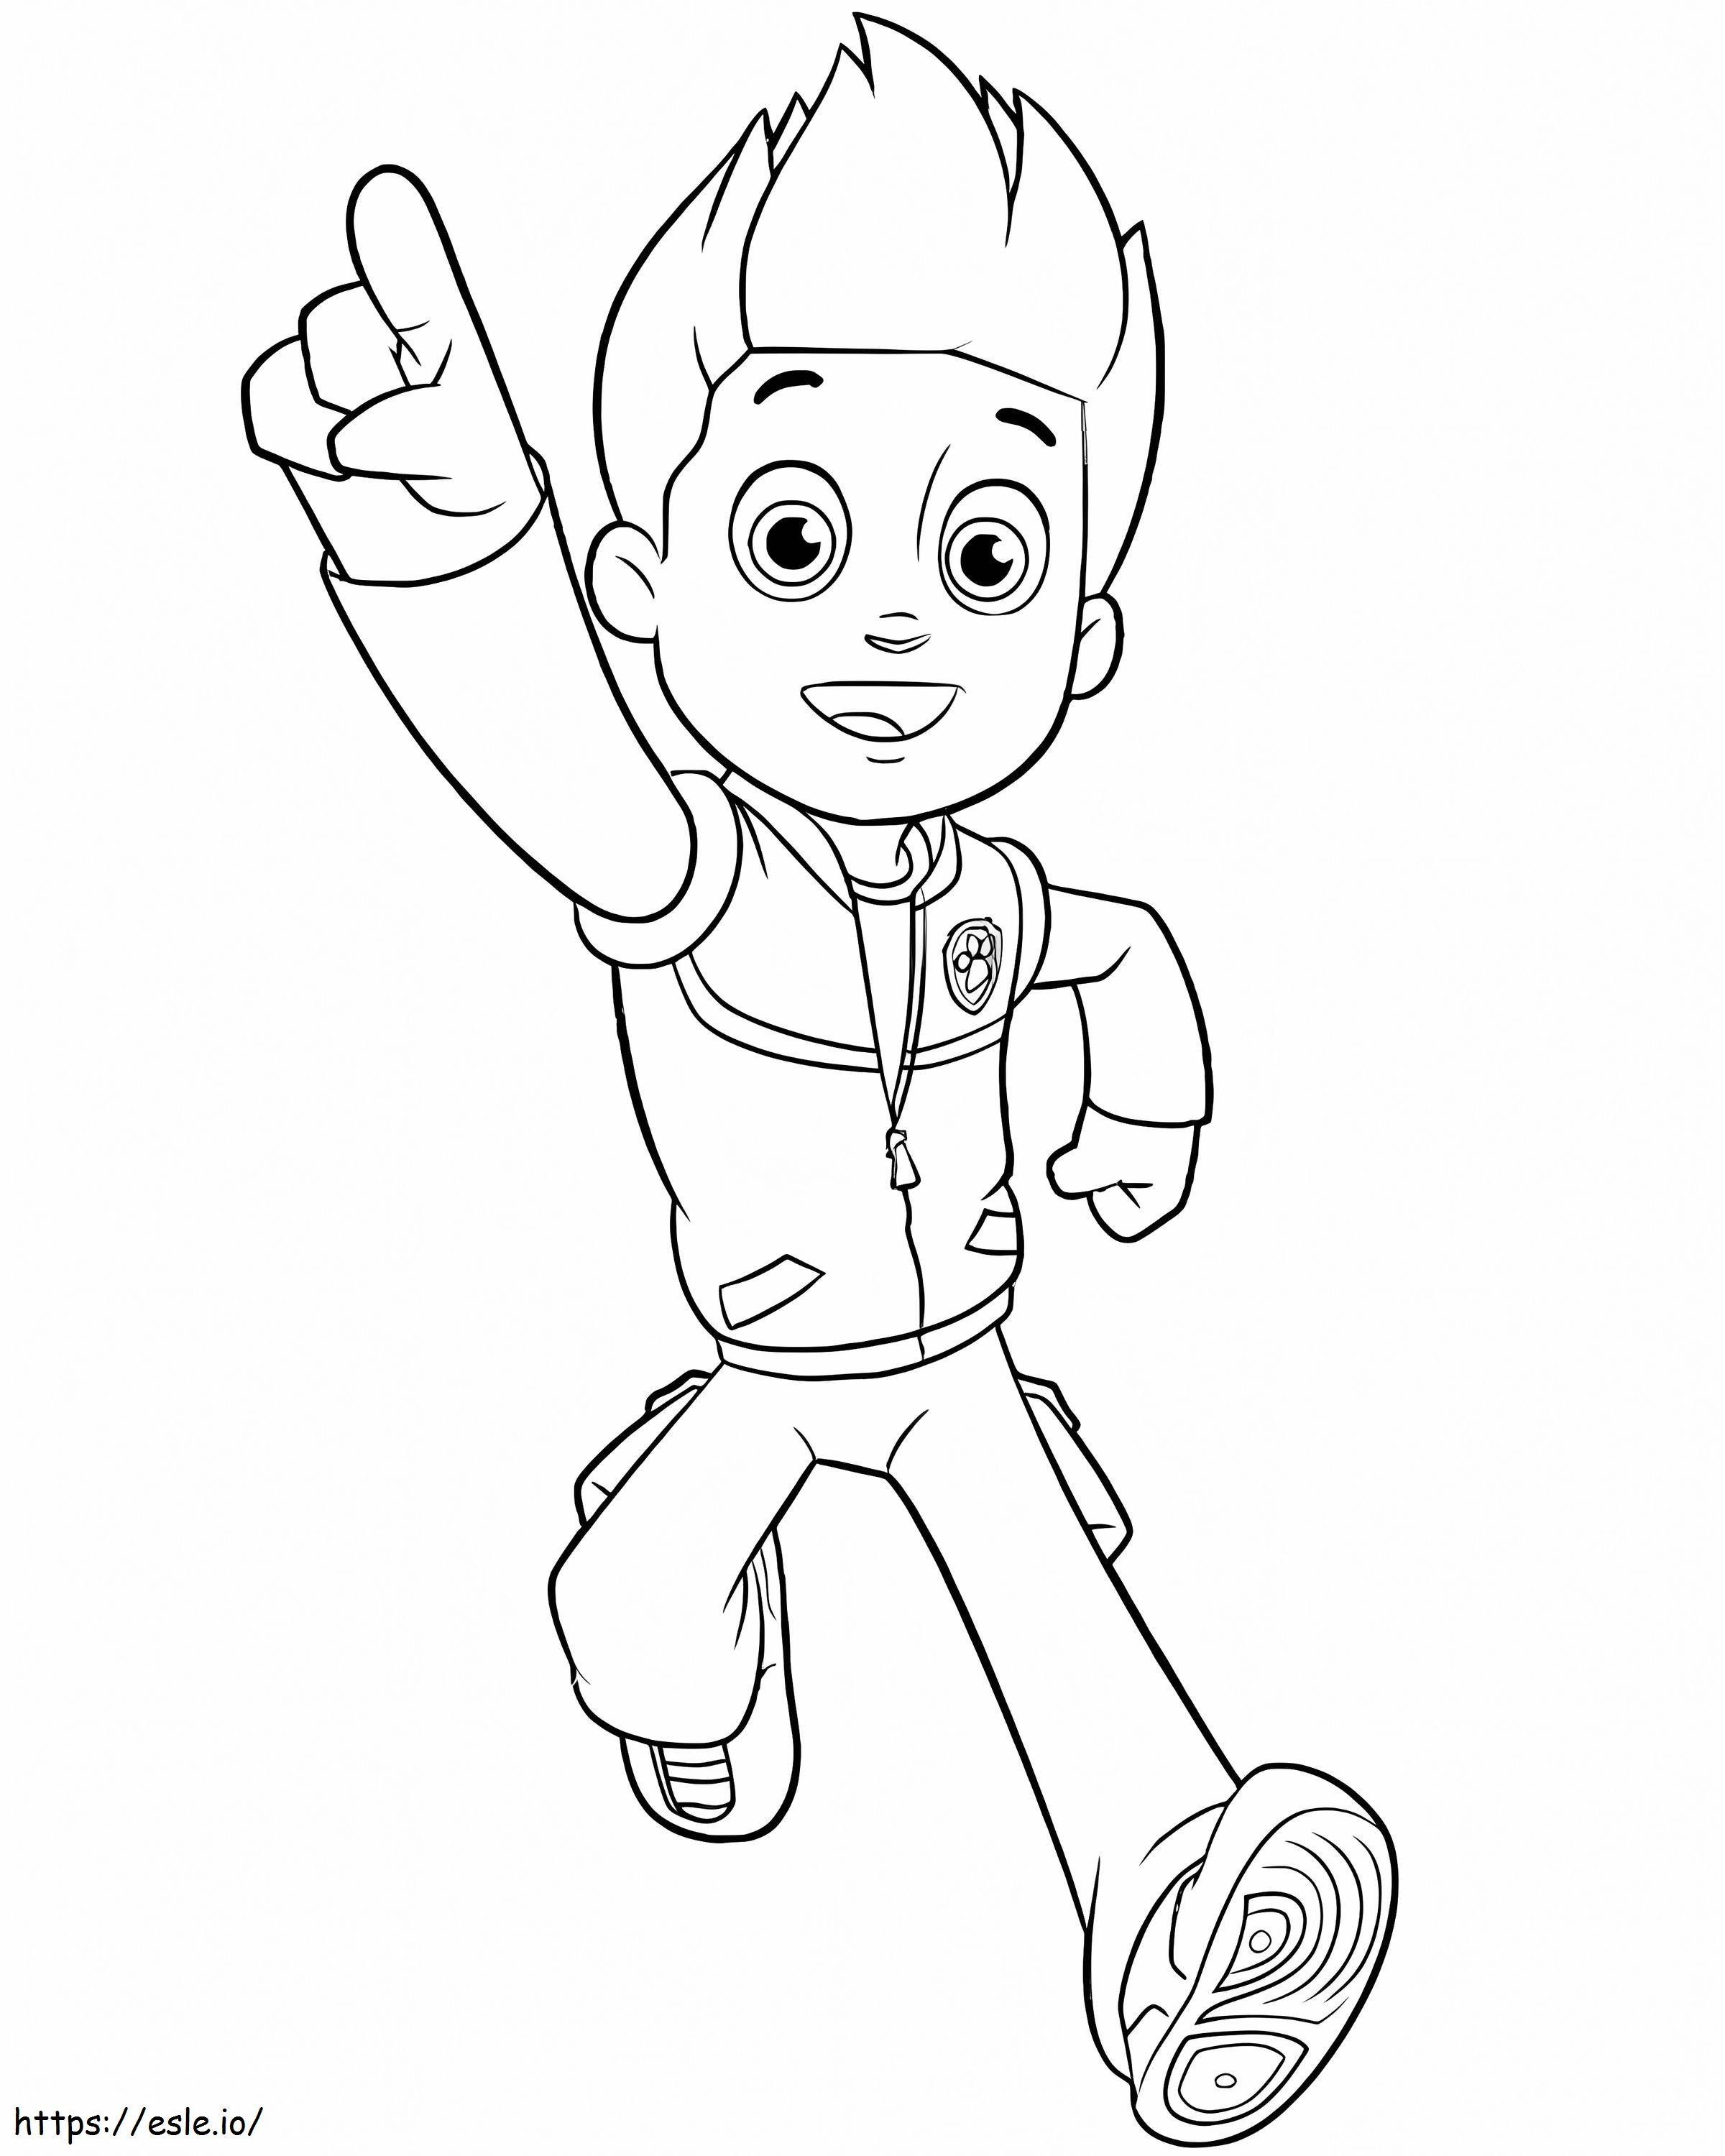 Handsome Ryder Paw Patrol coloring page